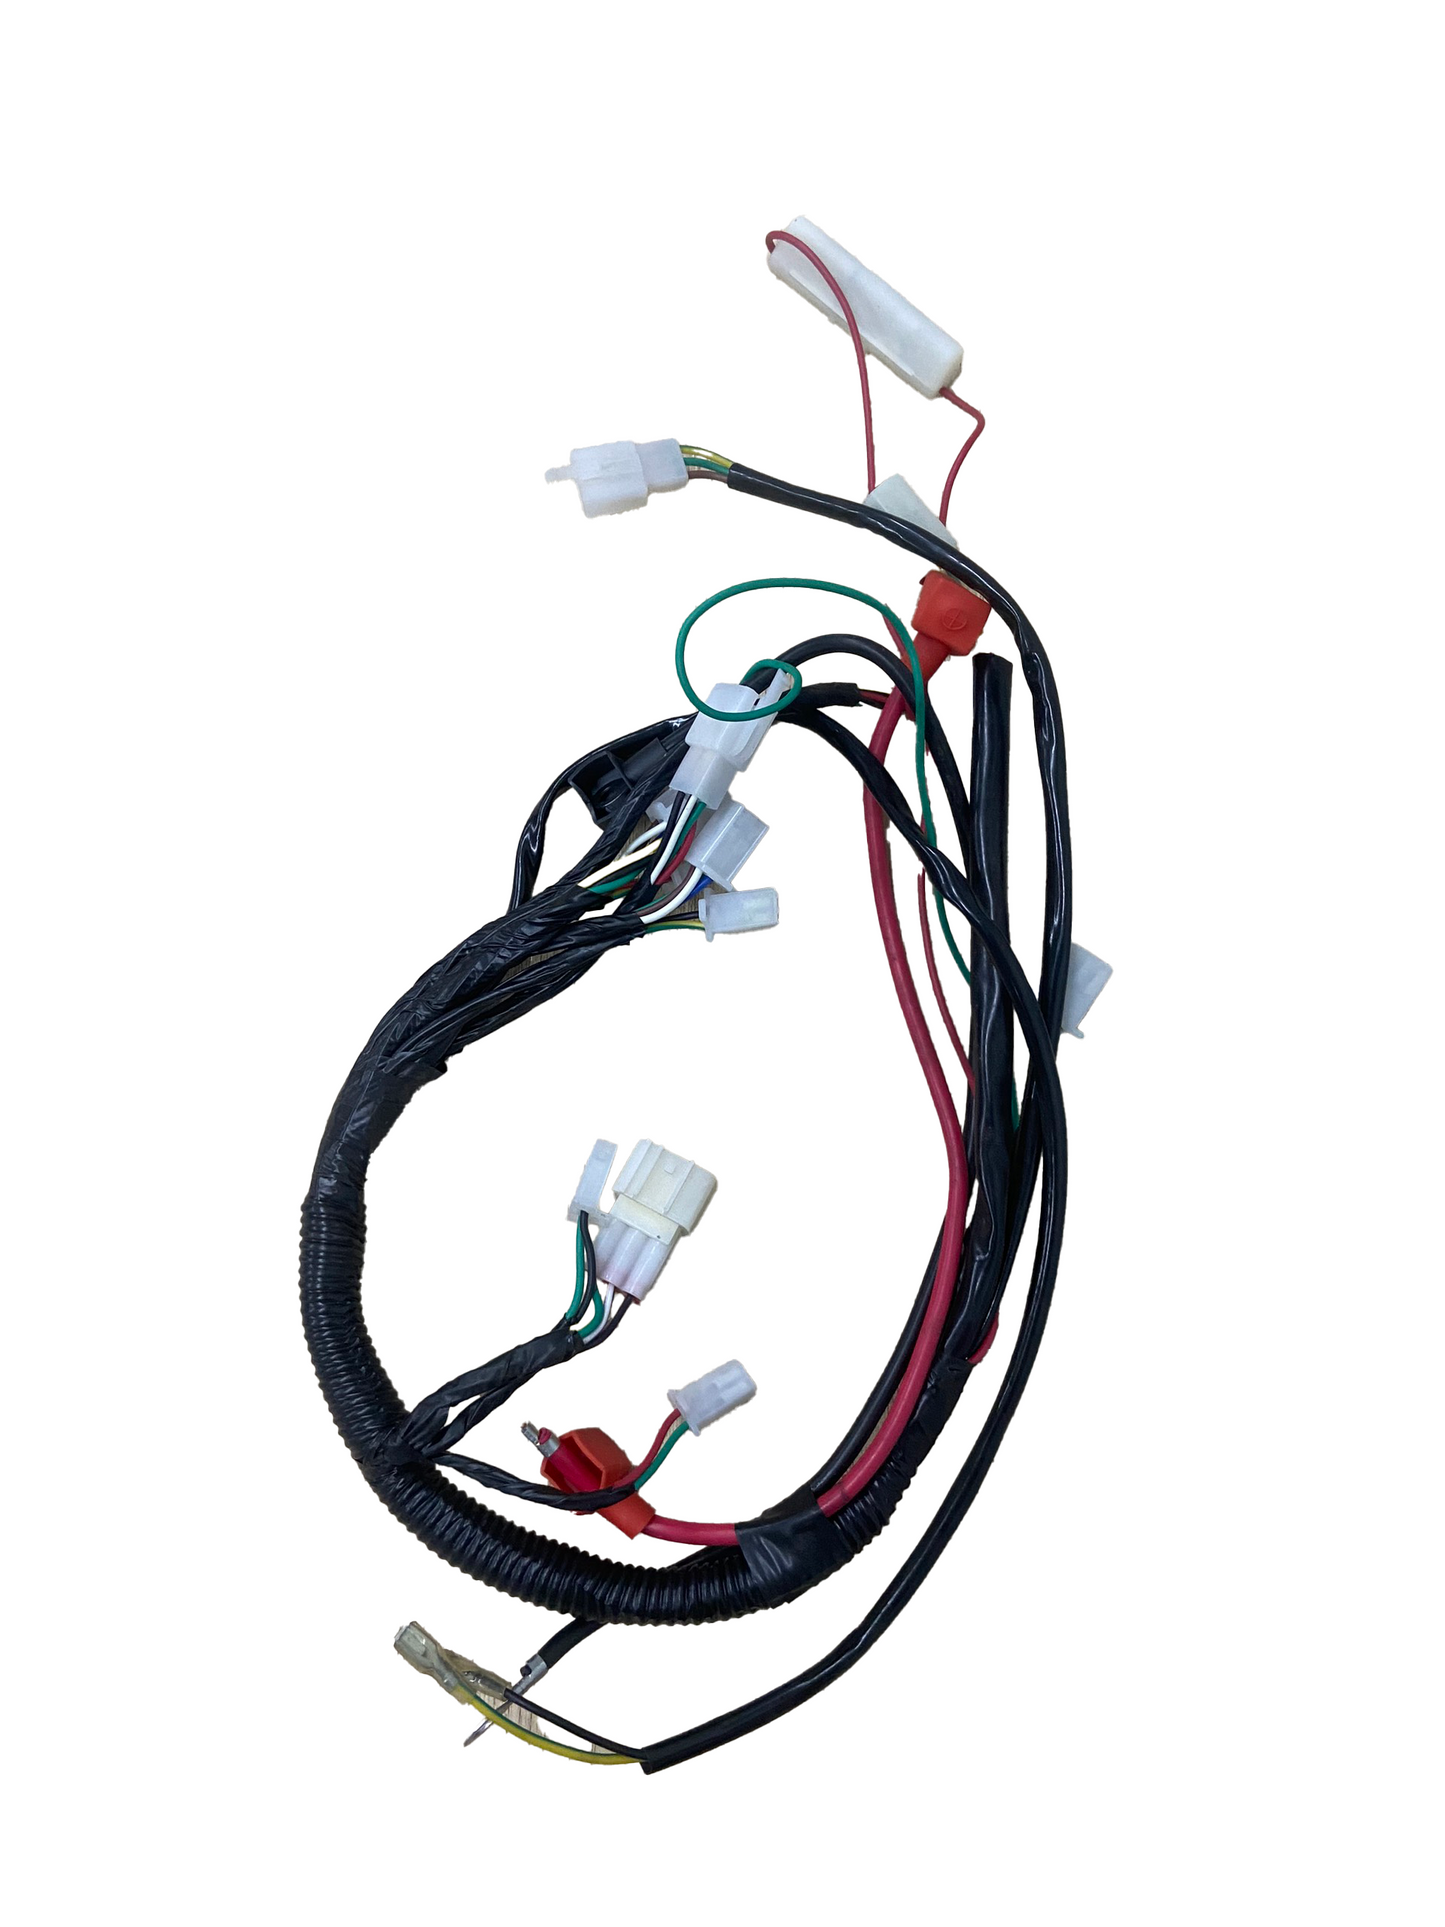 Seangles Main Wire Wiring Harness for 110cc ATV